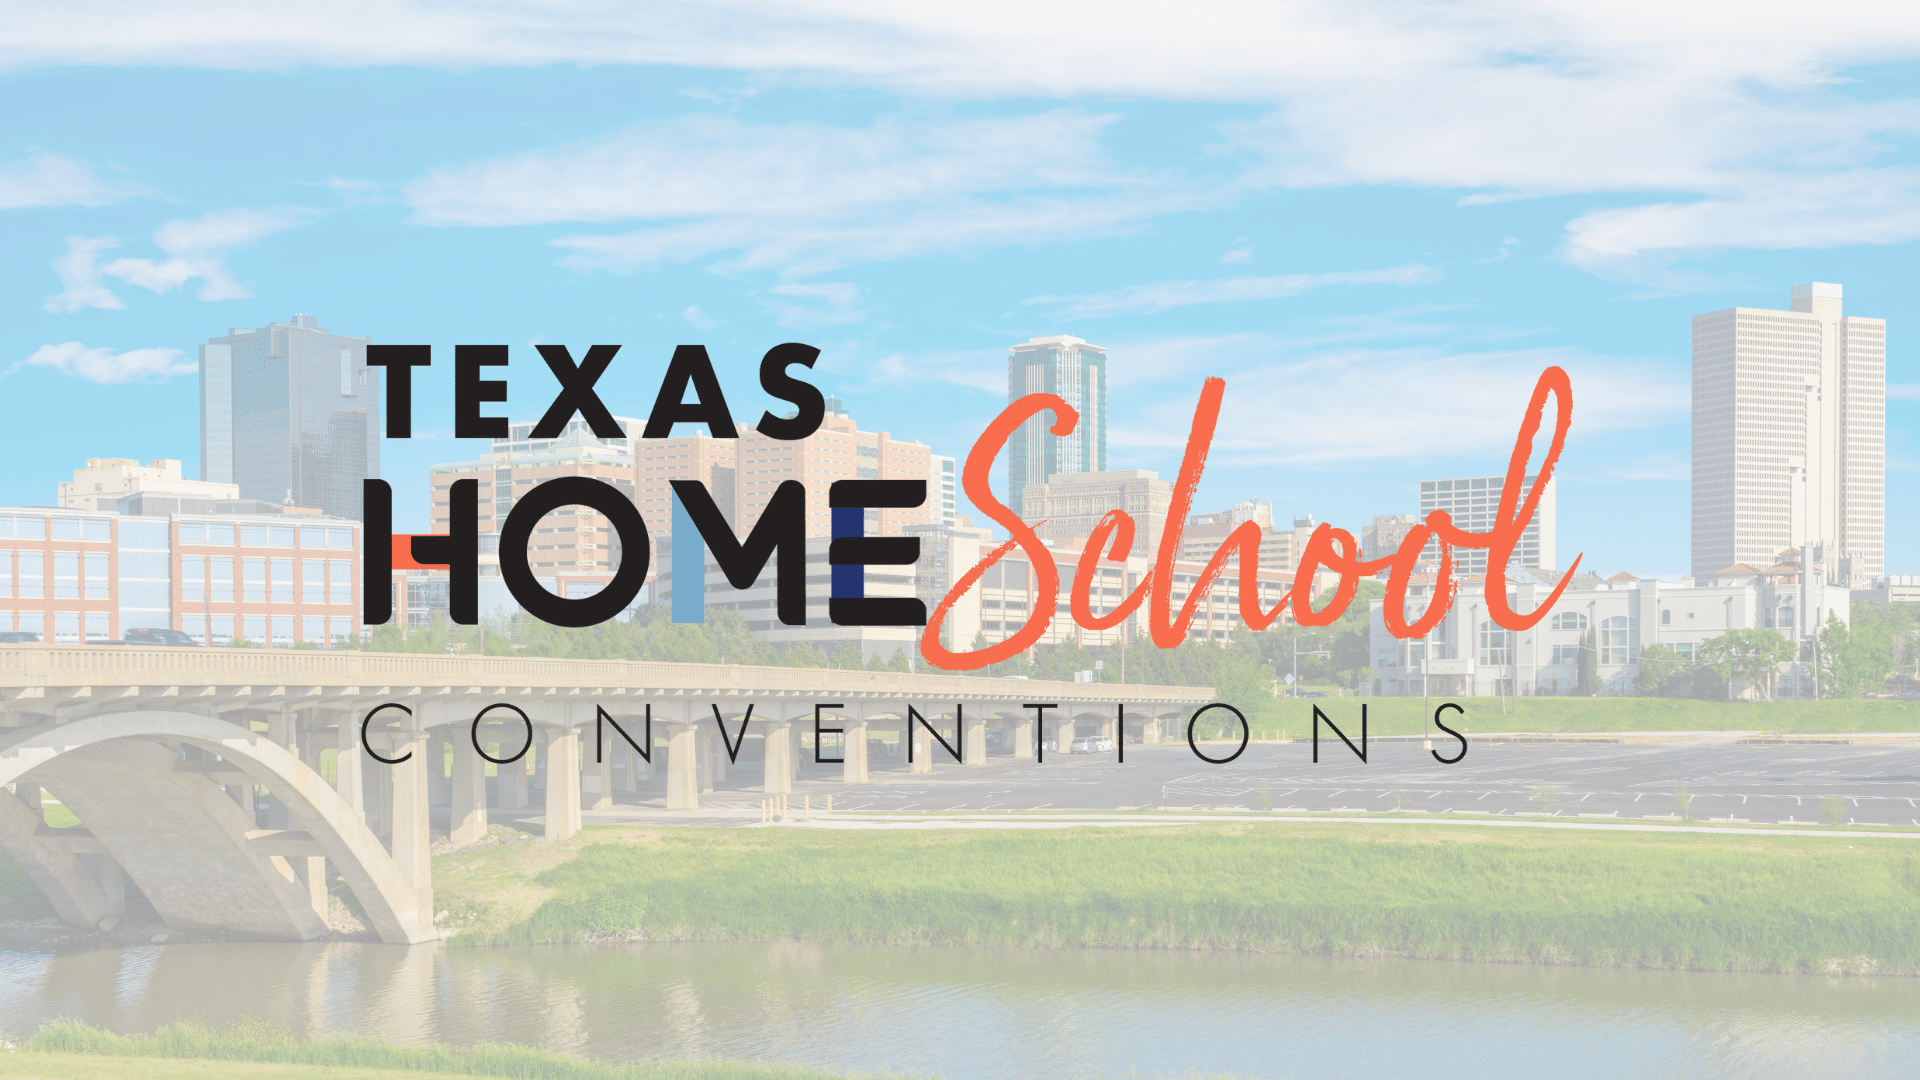 Texas Homeschool Convention Fort Worth Apologia